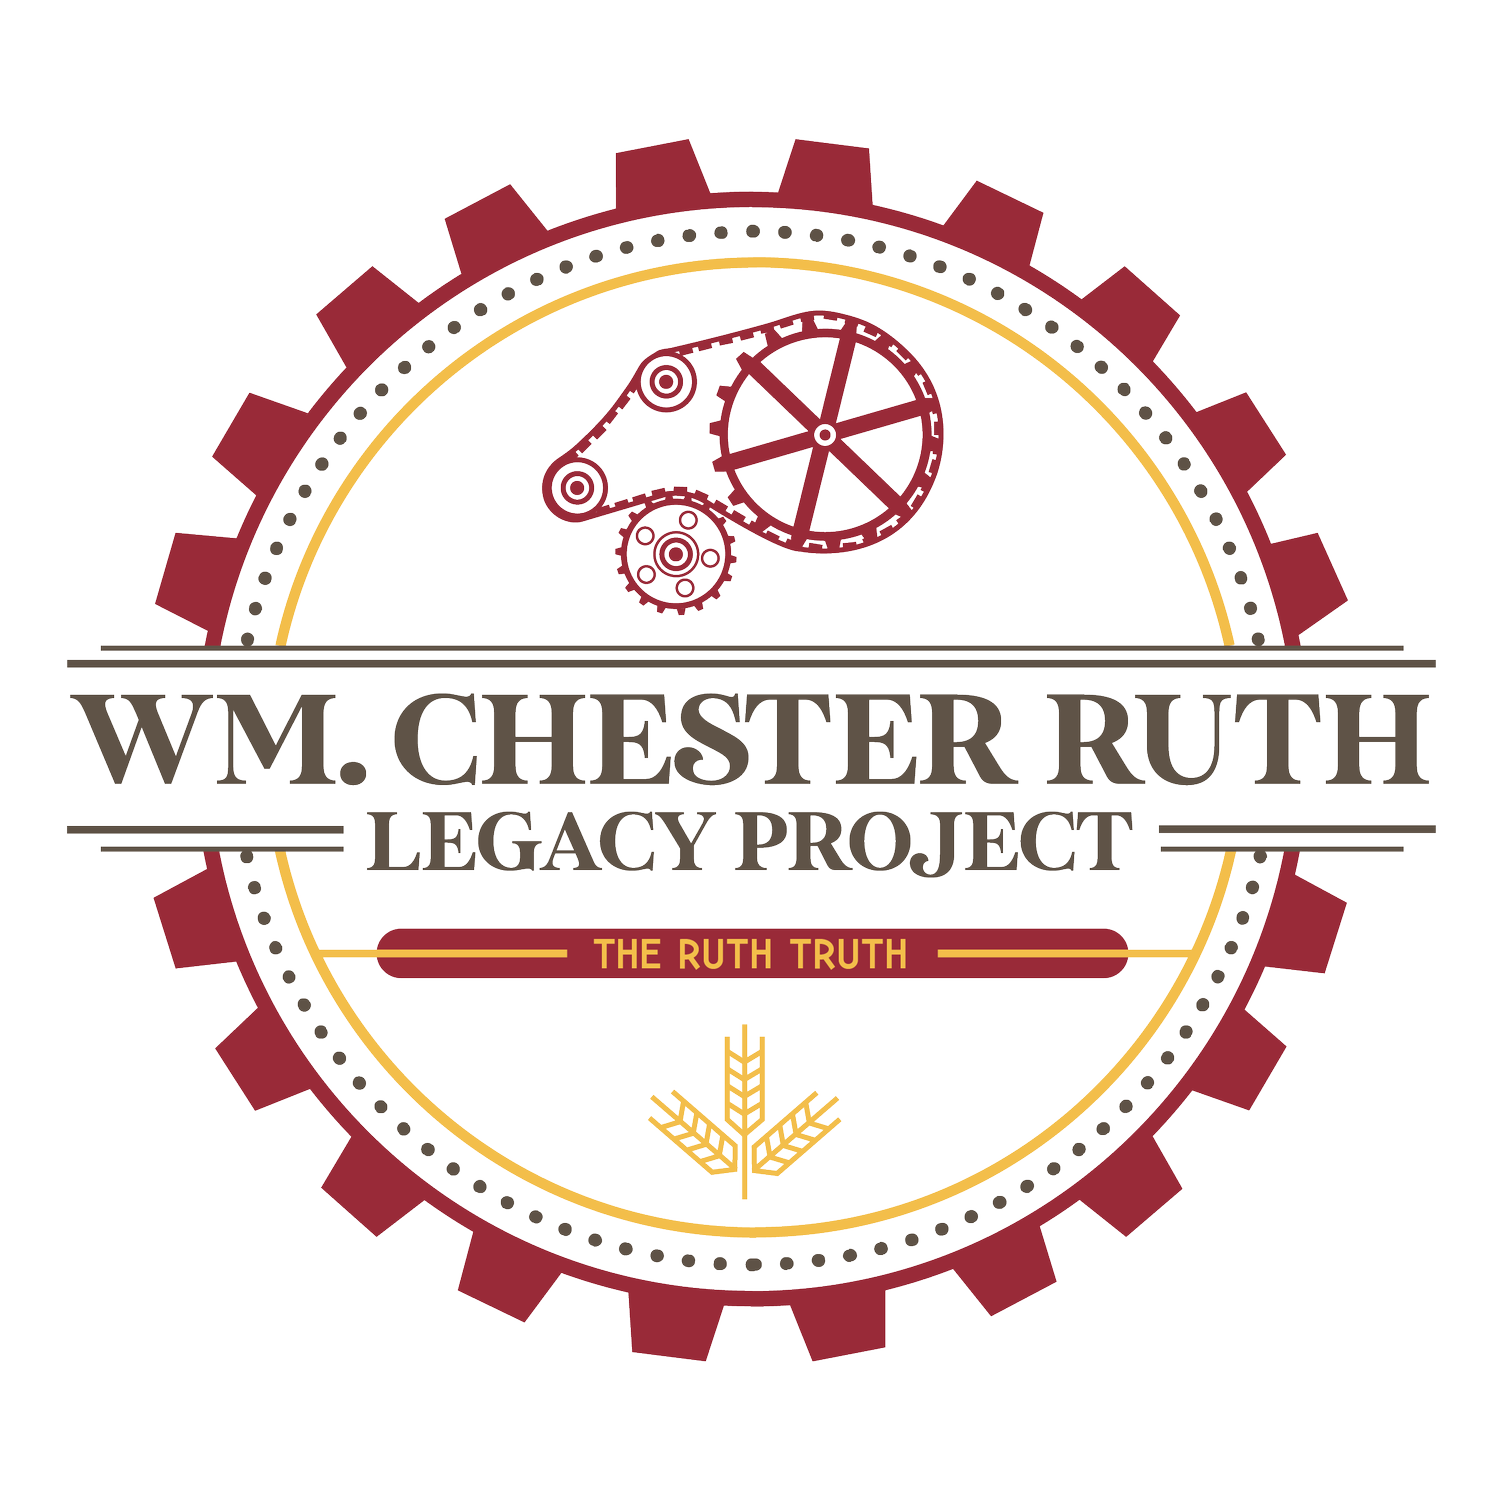 Wm. Chester Ruth Legacy Project